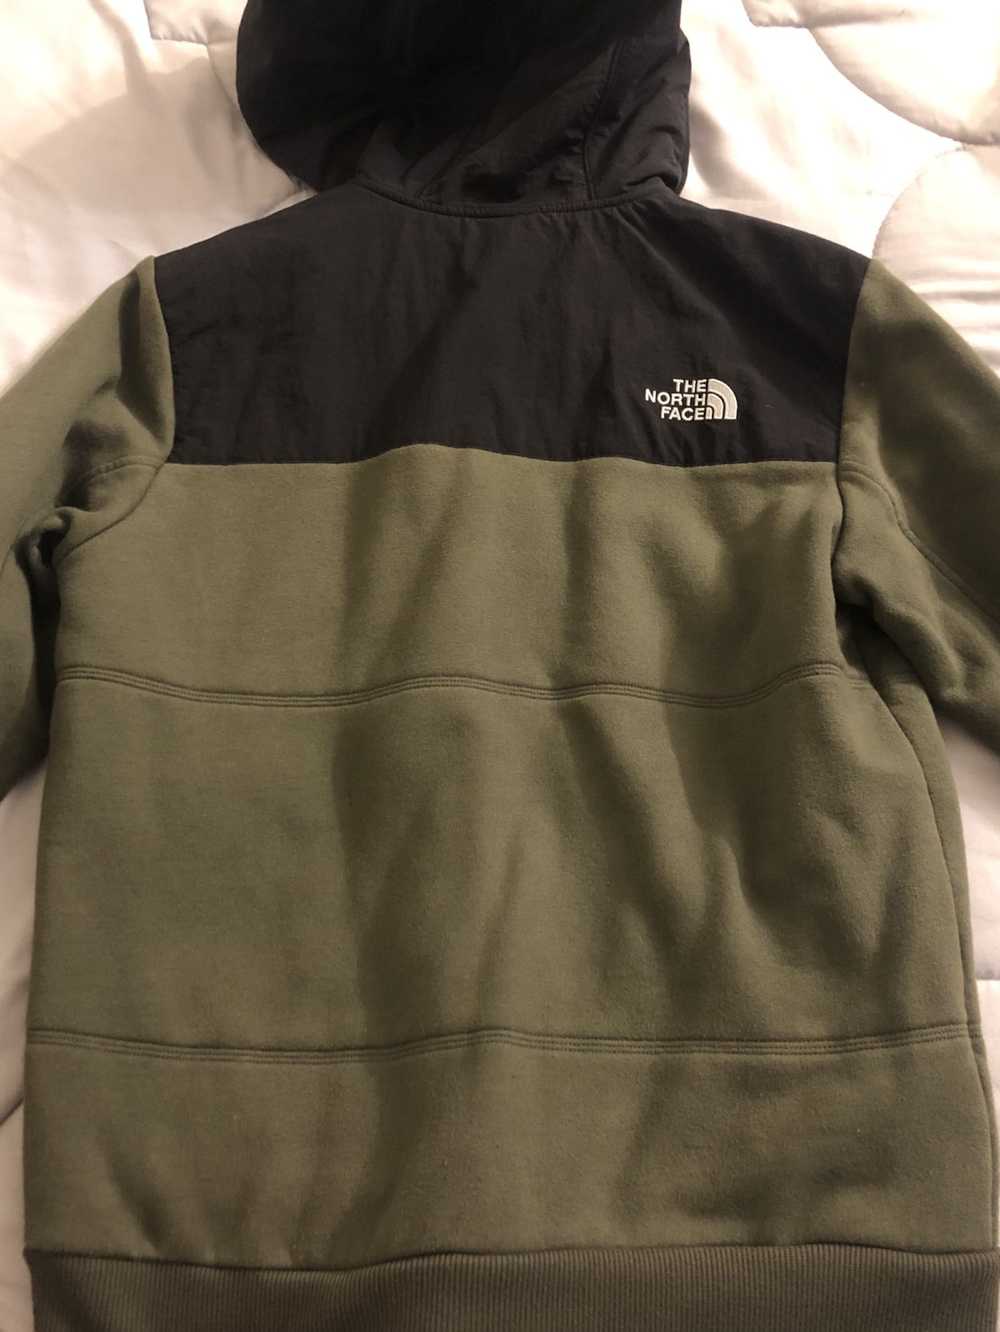 The North Face North face zip up jacket - image 4